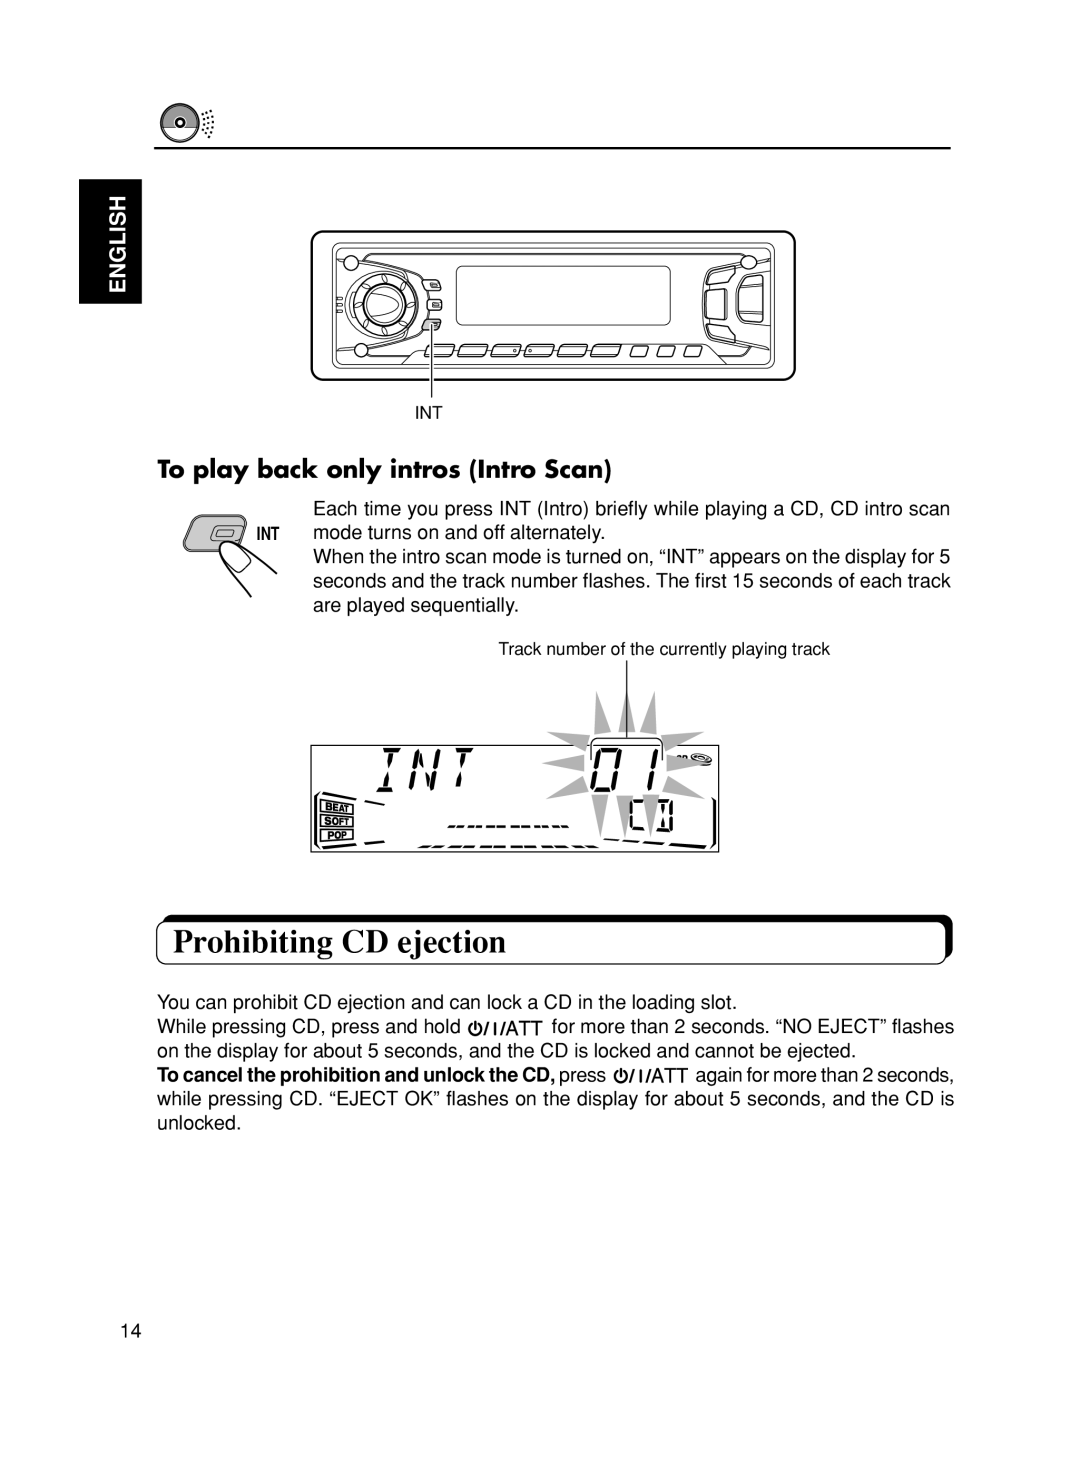 JVC KD-SX975, KD-SX875 manual Prohibiting CD ejection, To play back only intros Intro Scan, English 